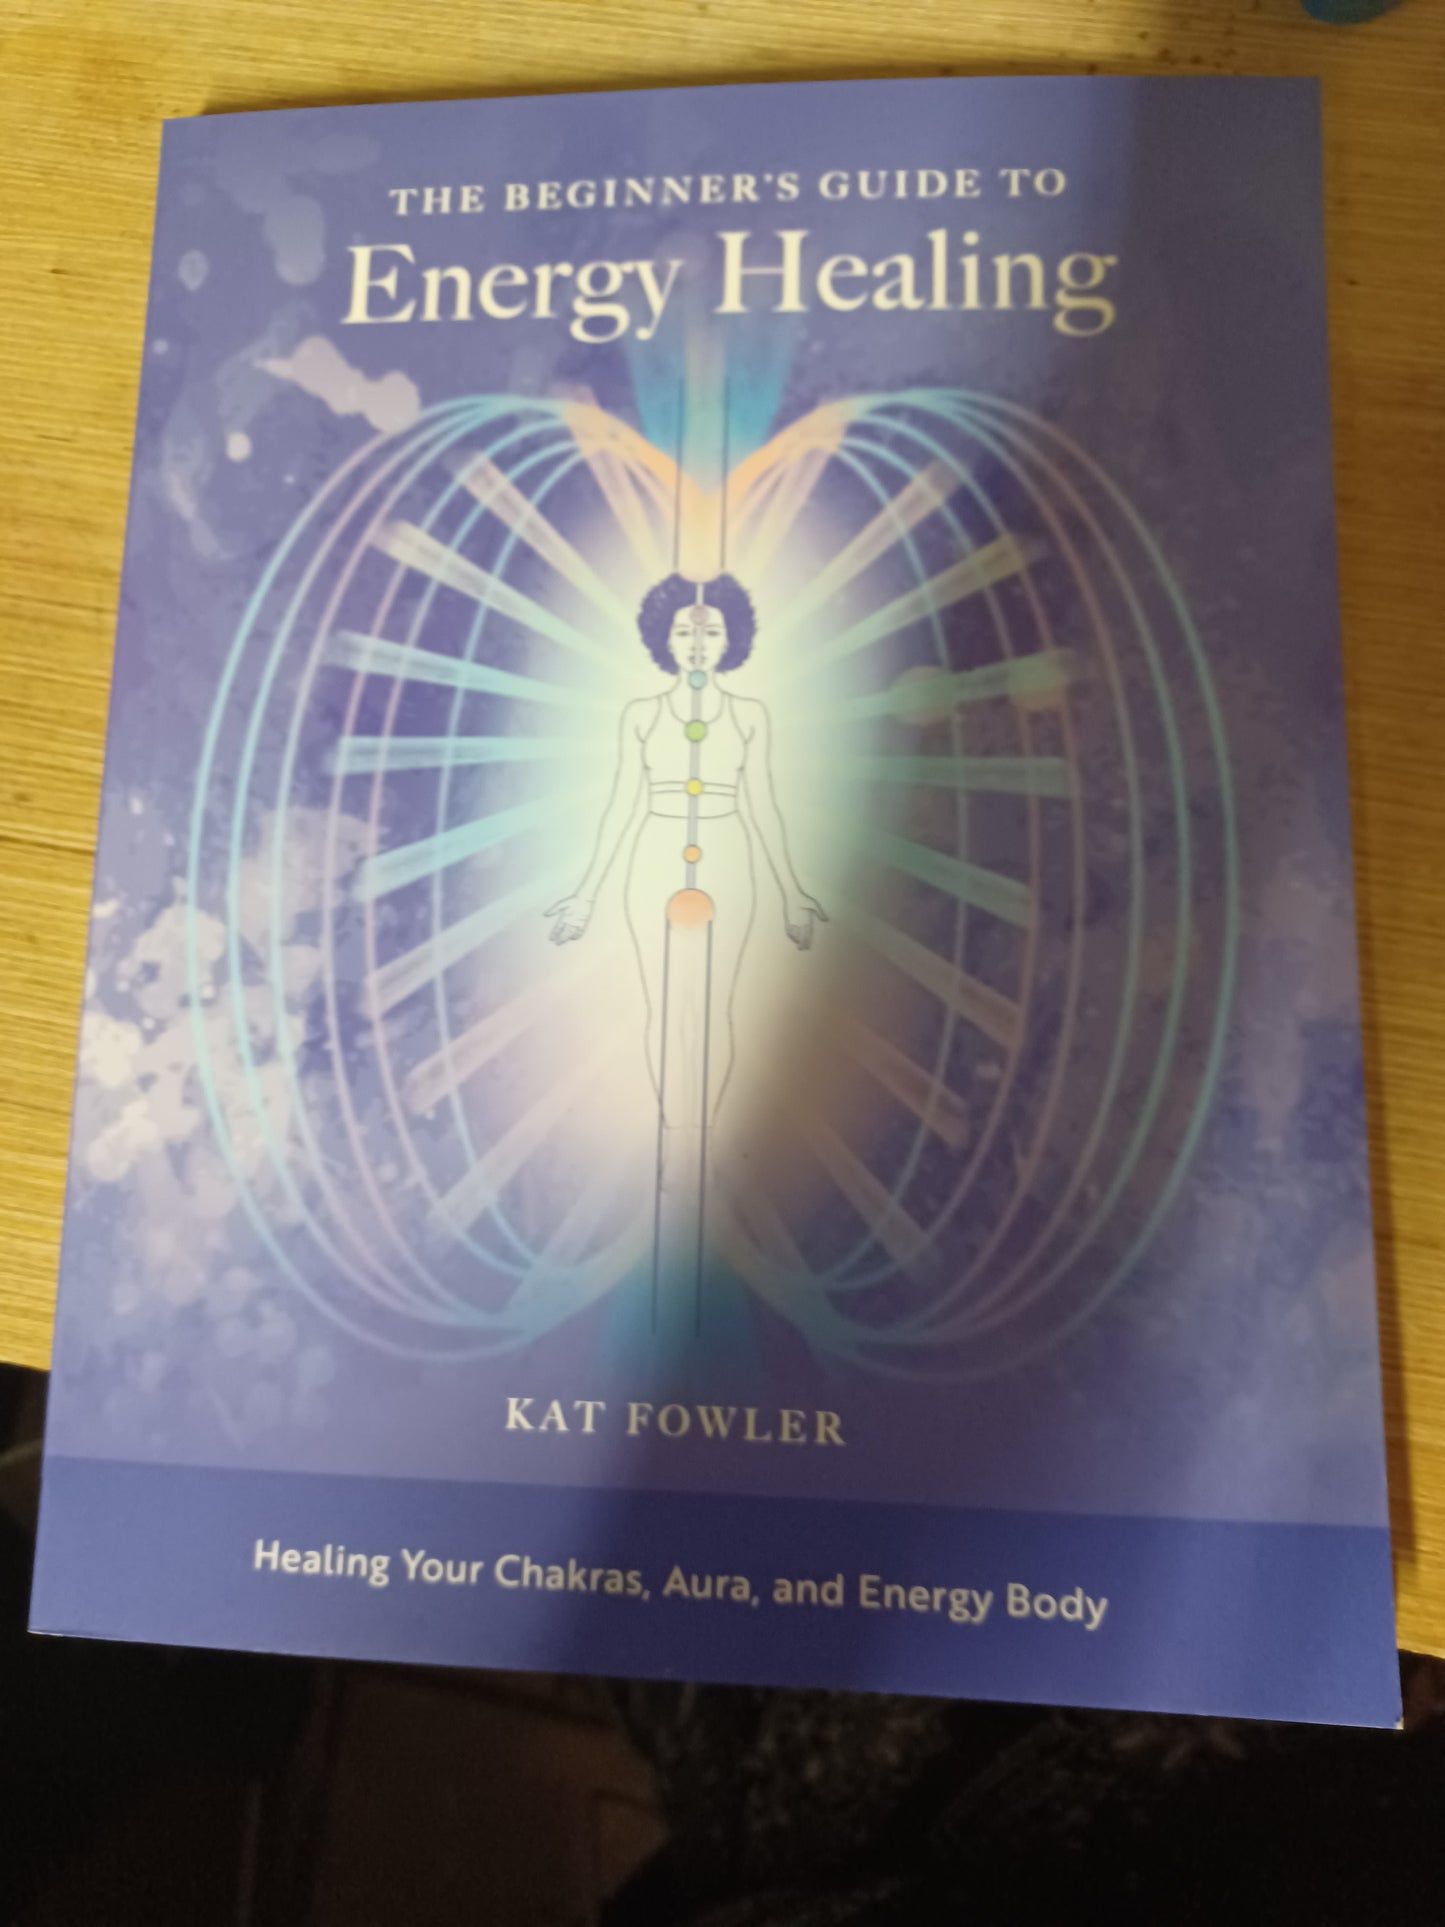 The Beginner's Guide to Healing Your Chakras, Aura, and Energy Body